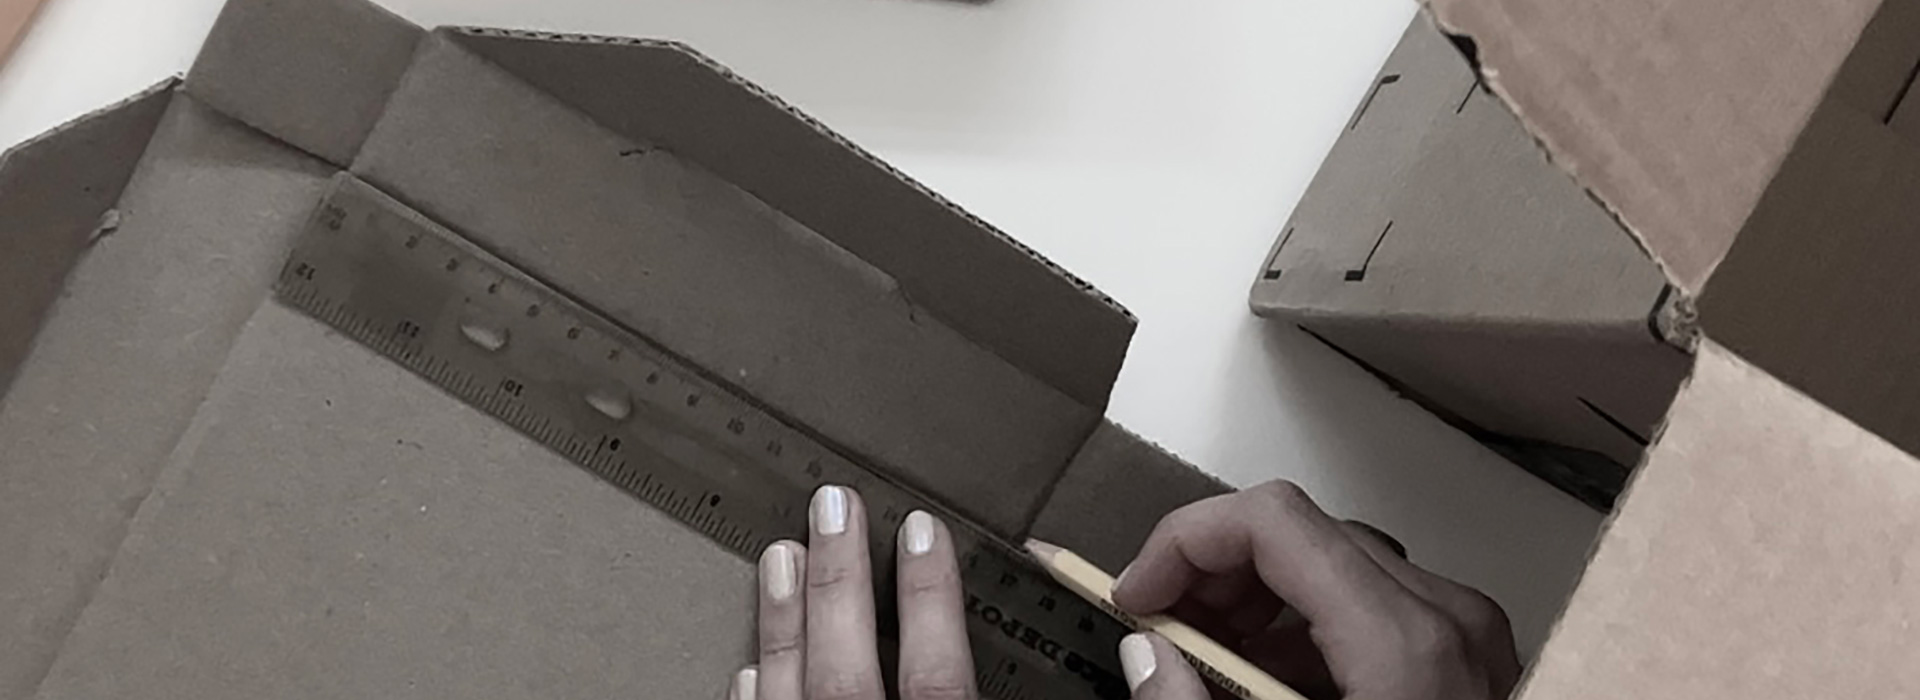 hands holding pencil and measuring cardboard